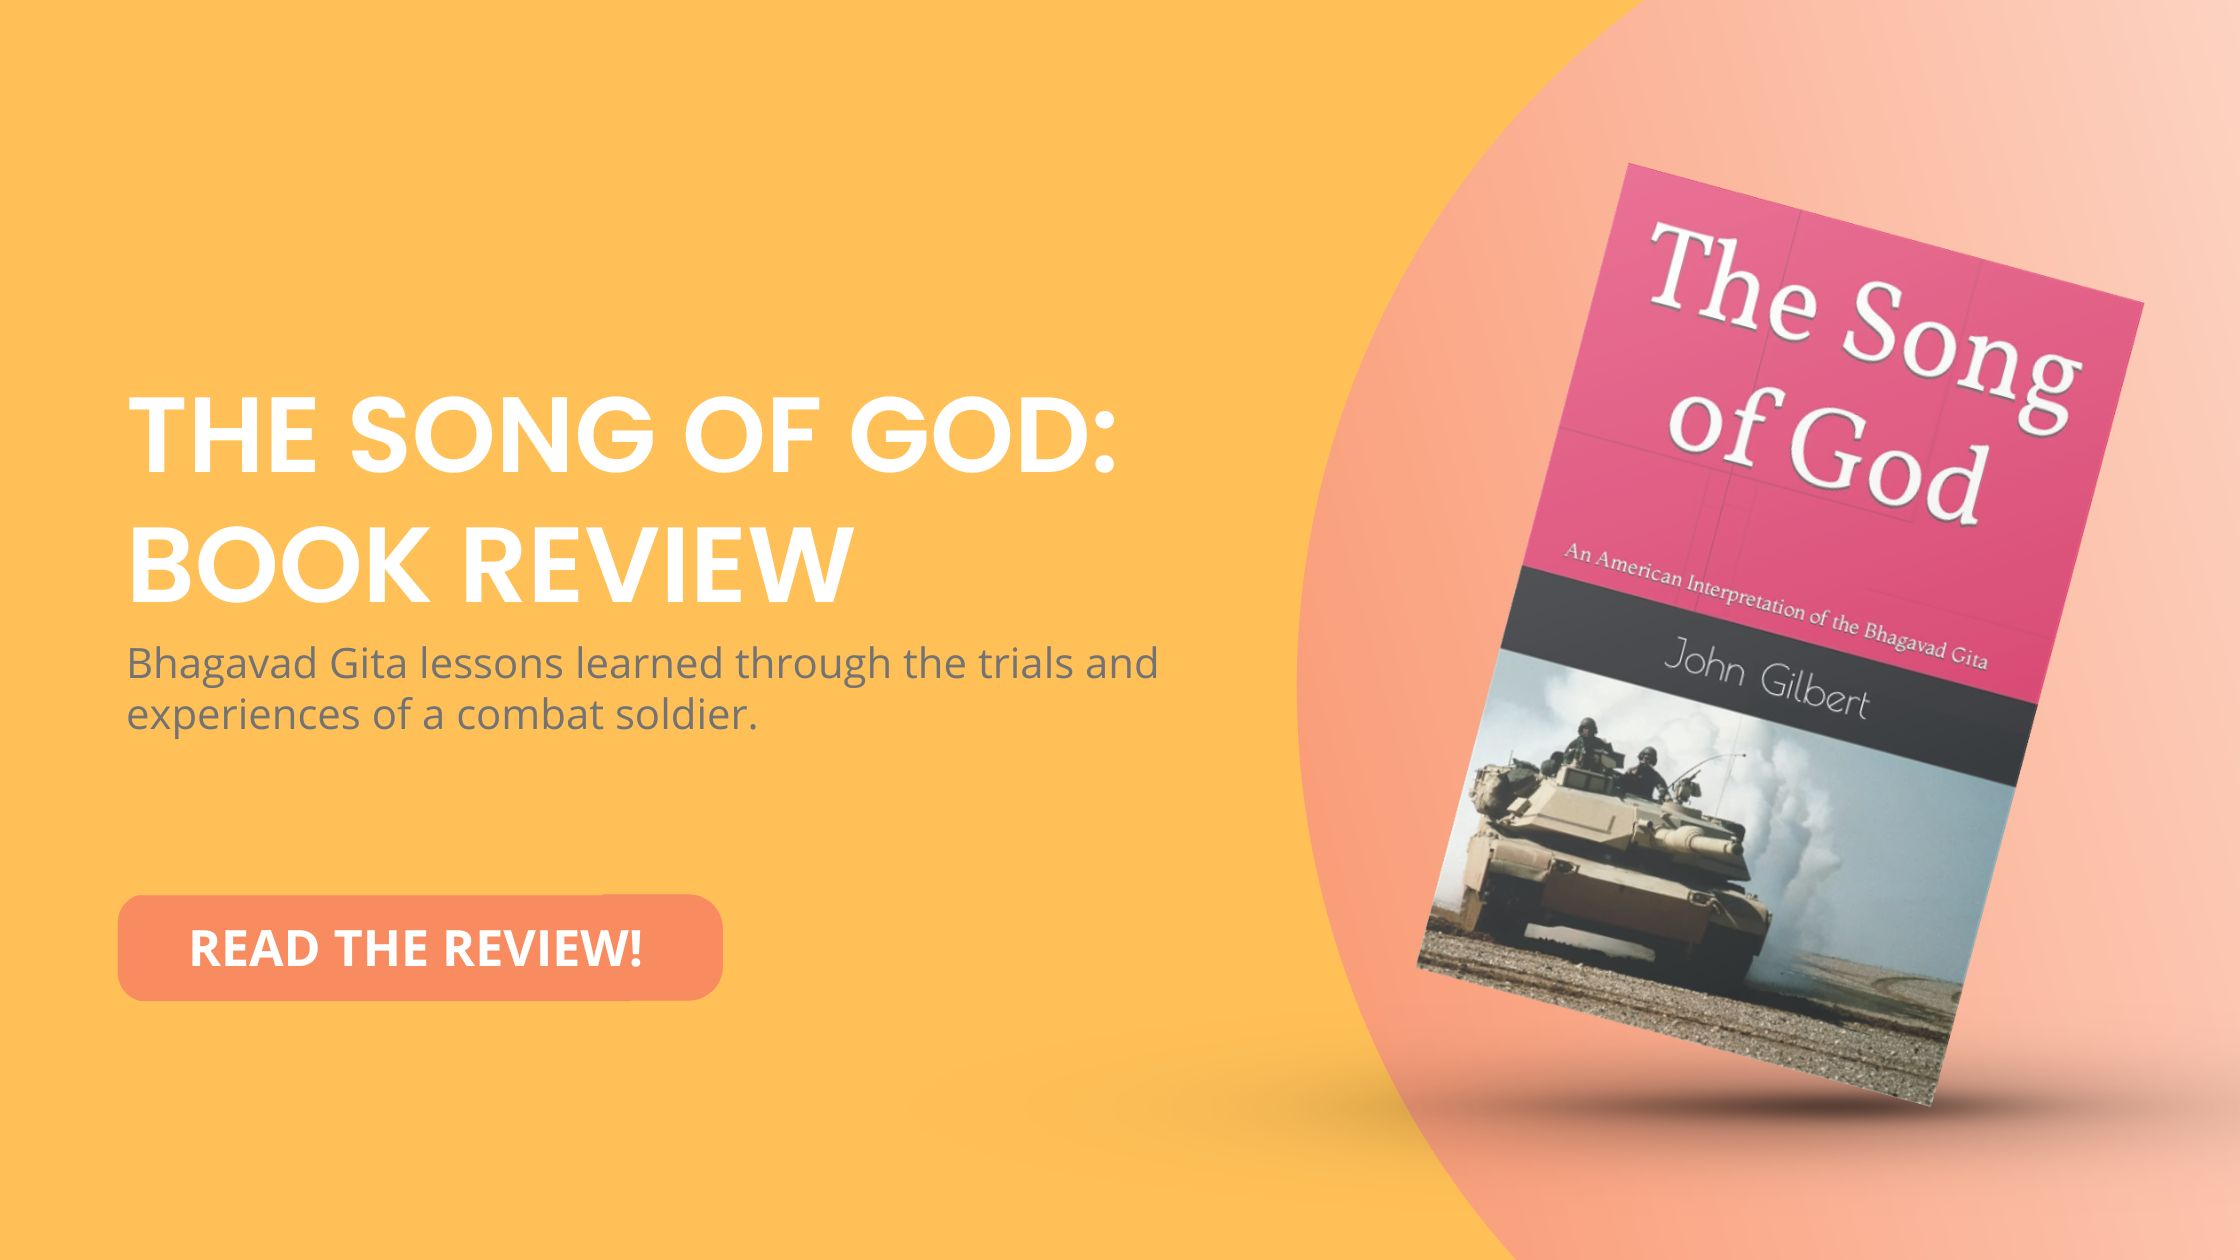 The Song of God by John Gilbert: Book Review